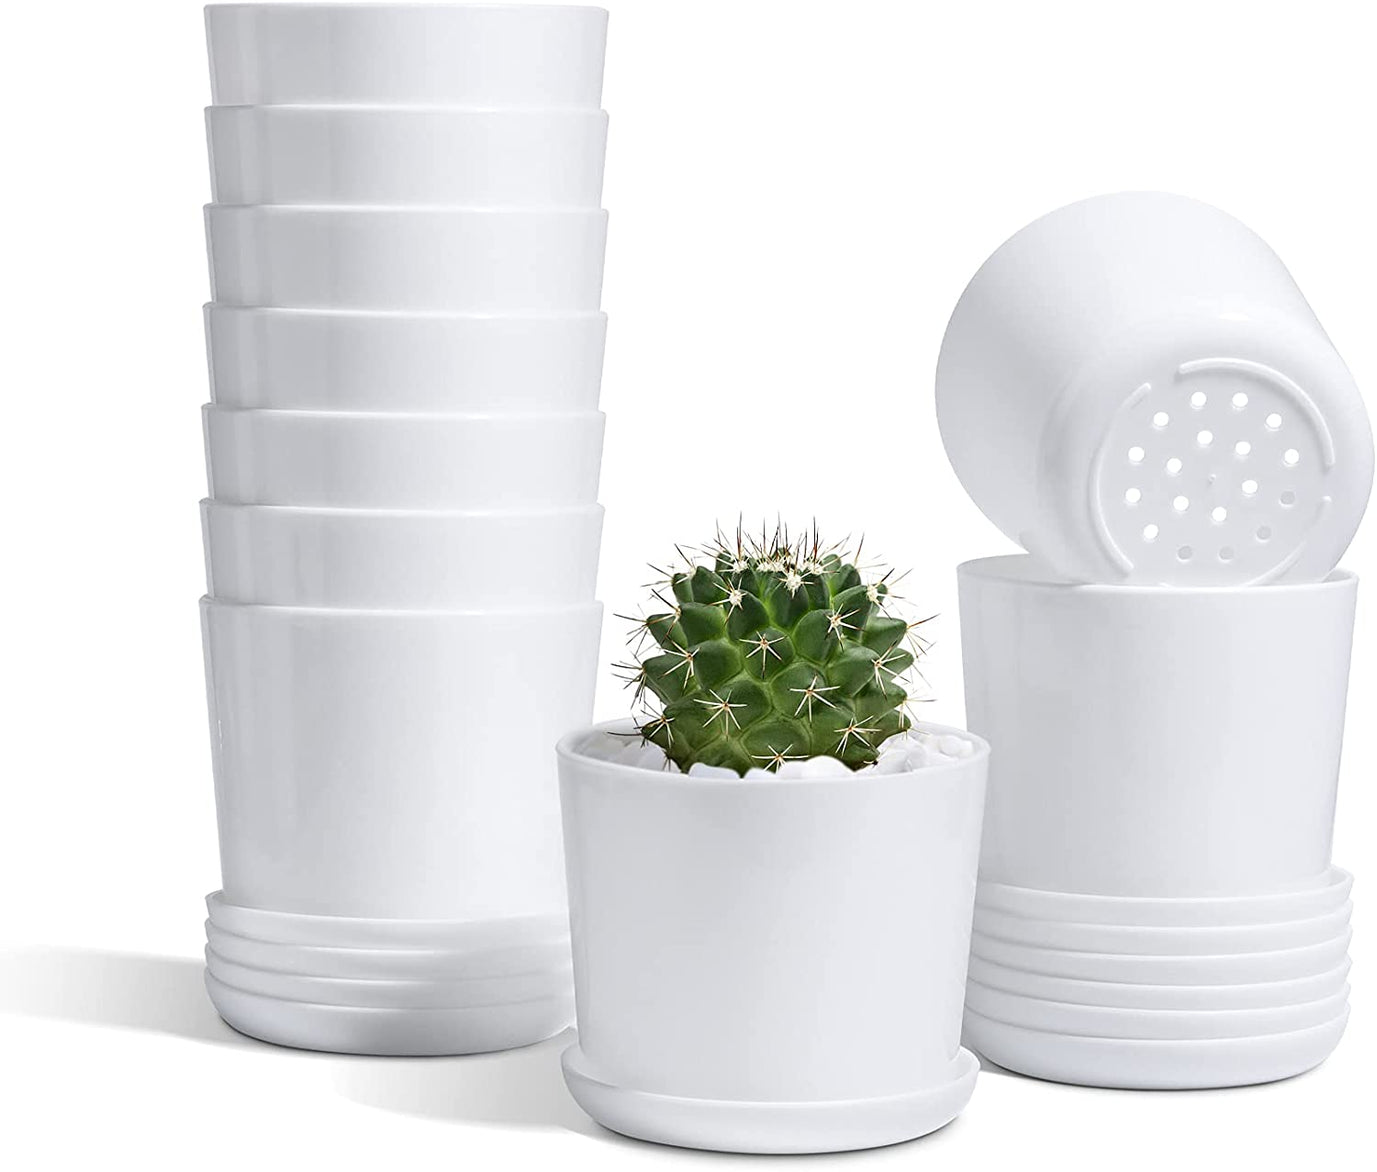 P2280 Tall Plastic Succulent Pots with trays - 20pcs,  White, 4